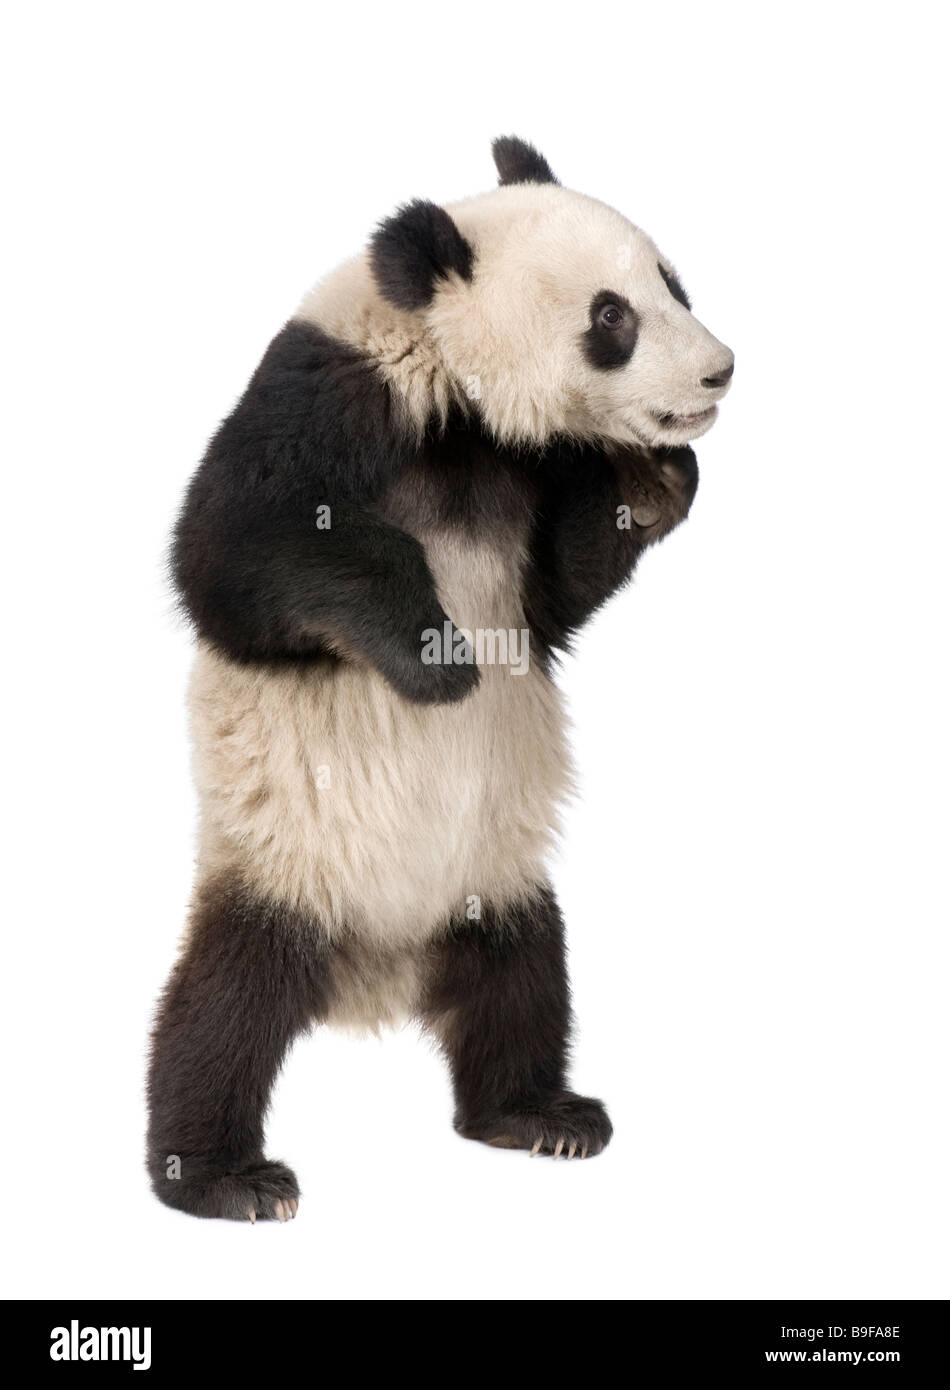 Giant Panda 18 months Ailuropoda melanoleuca in front of a white background Stock Photo